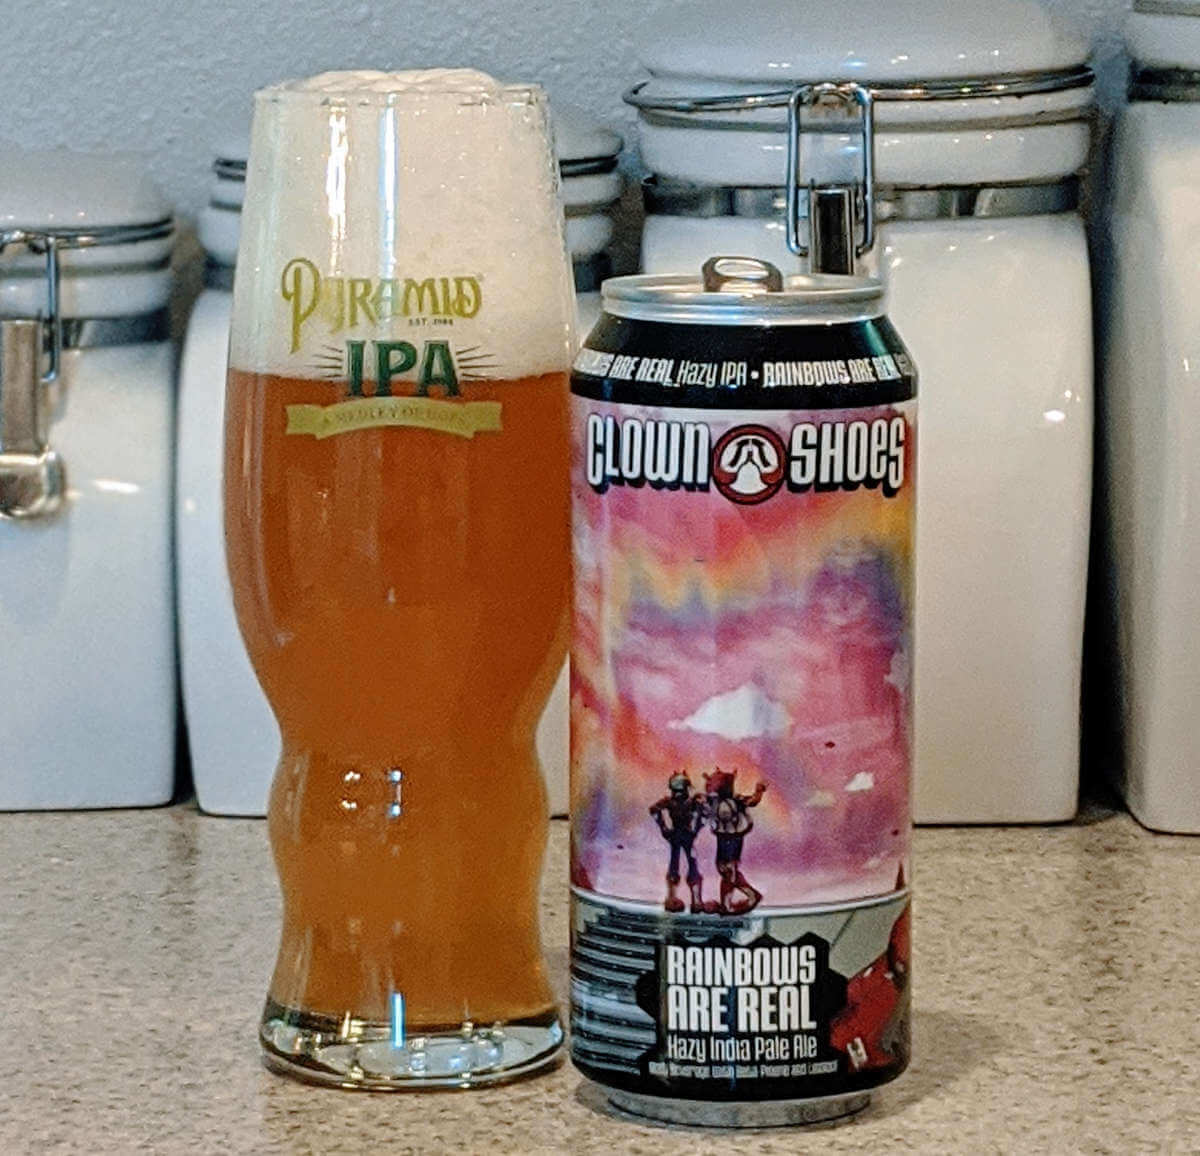 Rainbows Are Real: Clown Shoes Beer’s terpene-infused hazy IPA